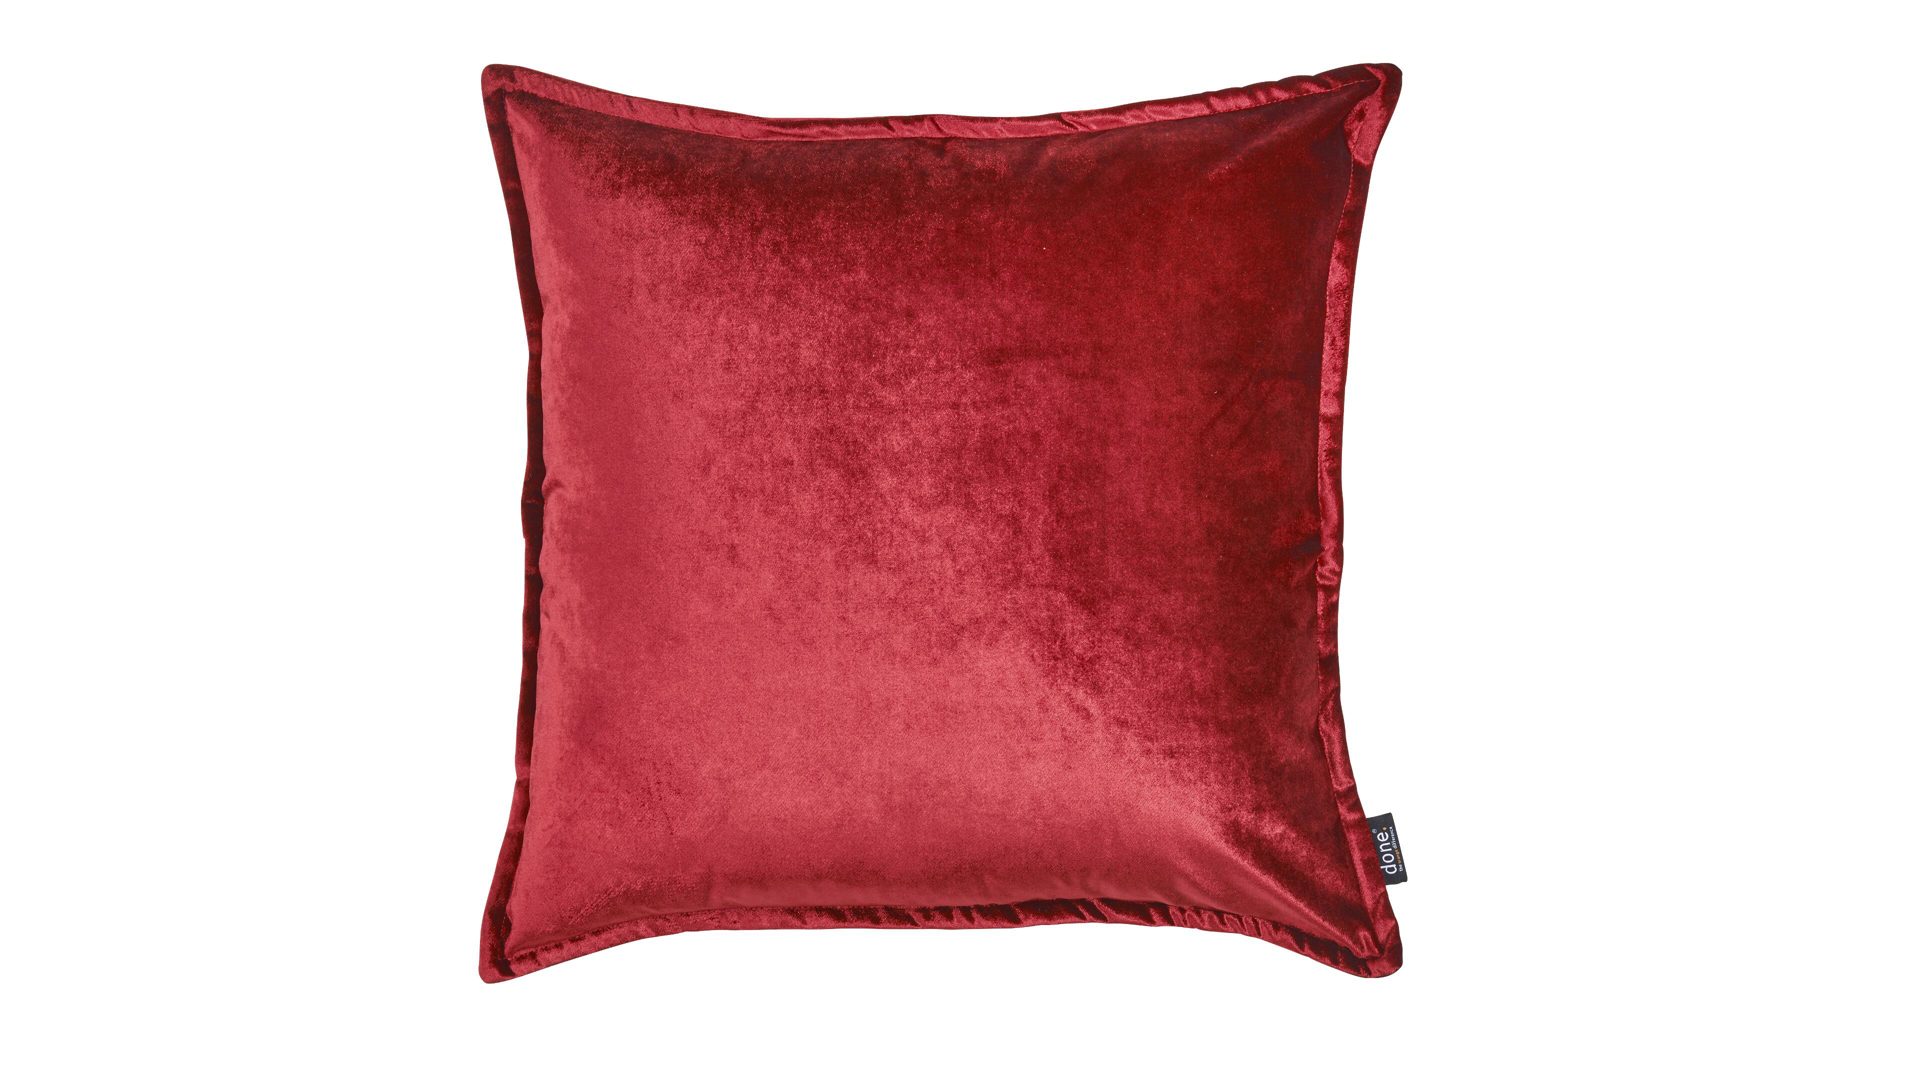 Kissenbezug /-hülle Done® be different aus Stoff in Dunkelrot DONE® Kissenhülle Cushion Glam roter Samt – ca. 65 x 65 cm